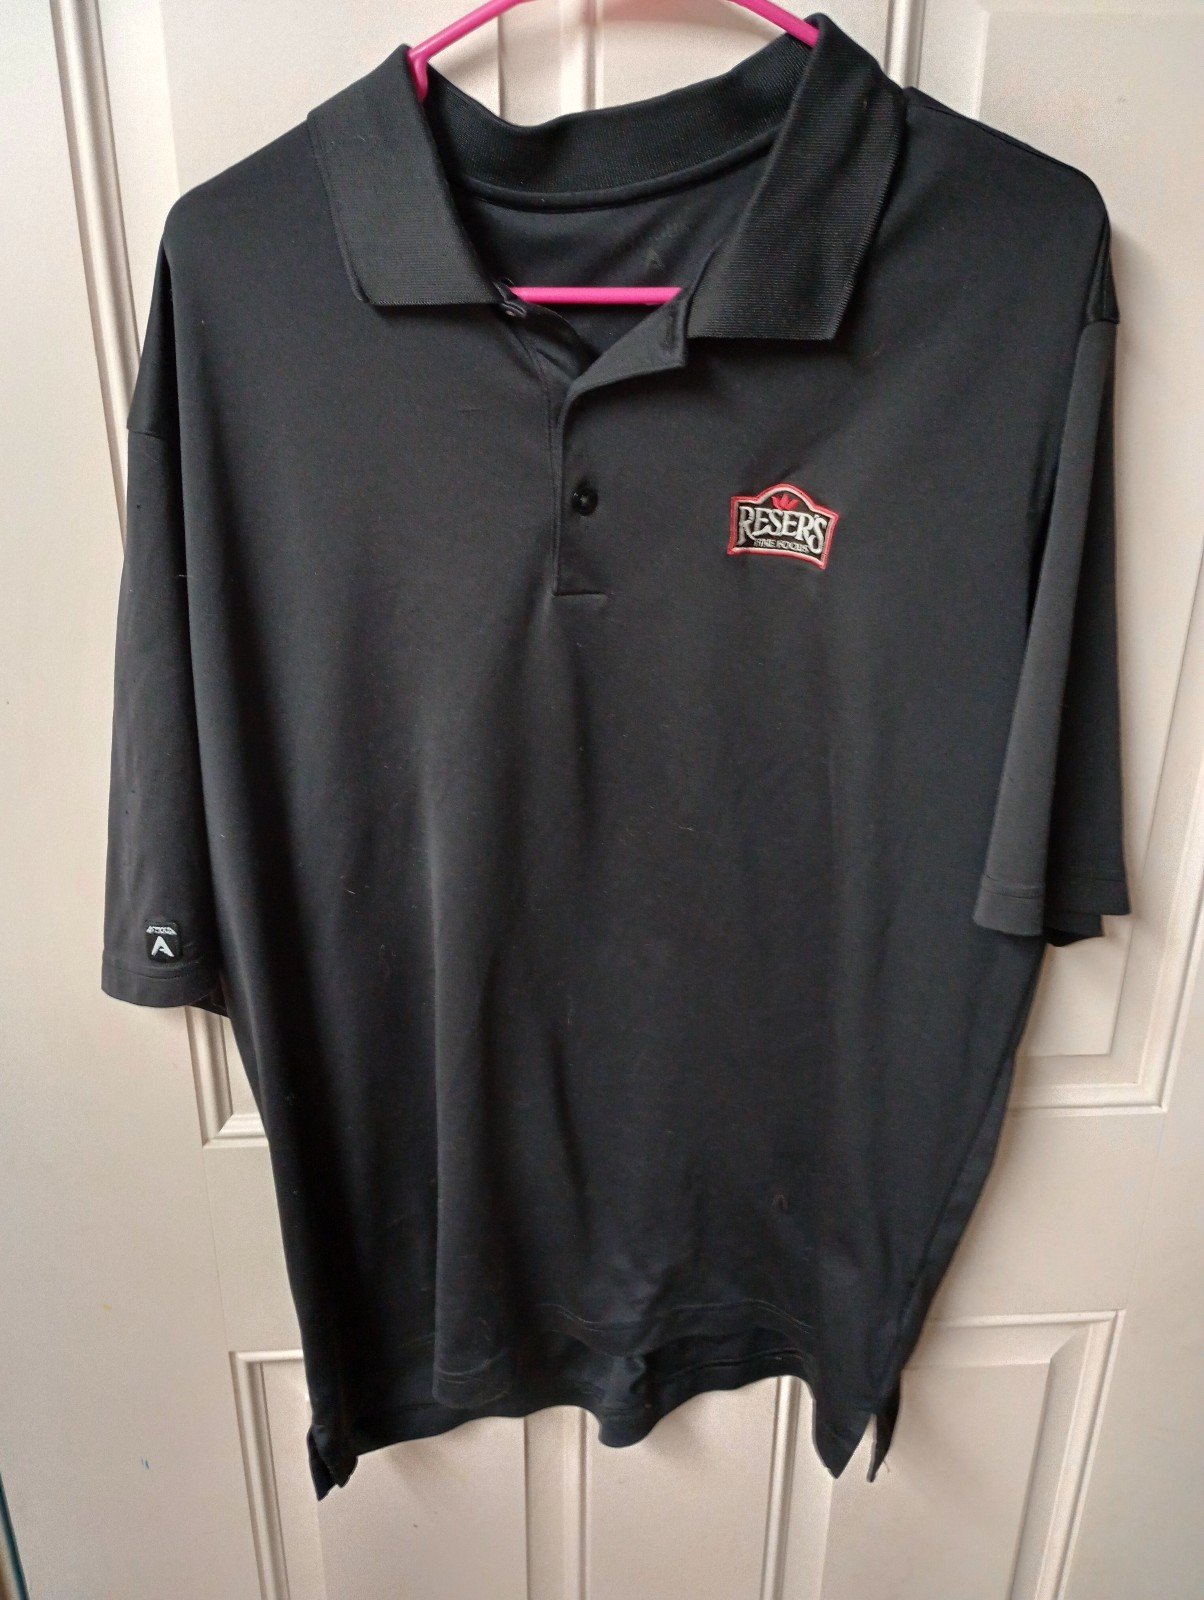 Resers Fine Foods Employee Work Embroidered SS Polo Shirt. Black Partial Button